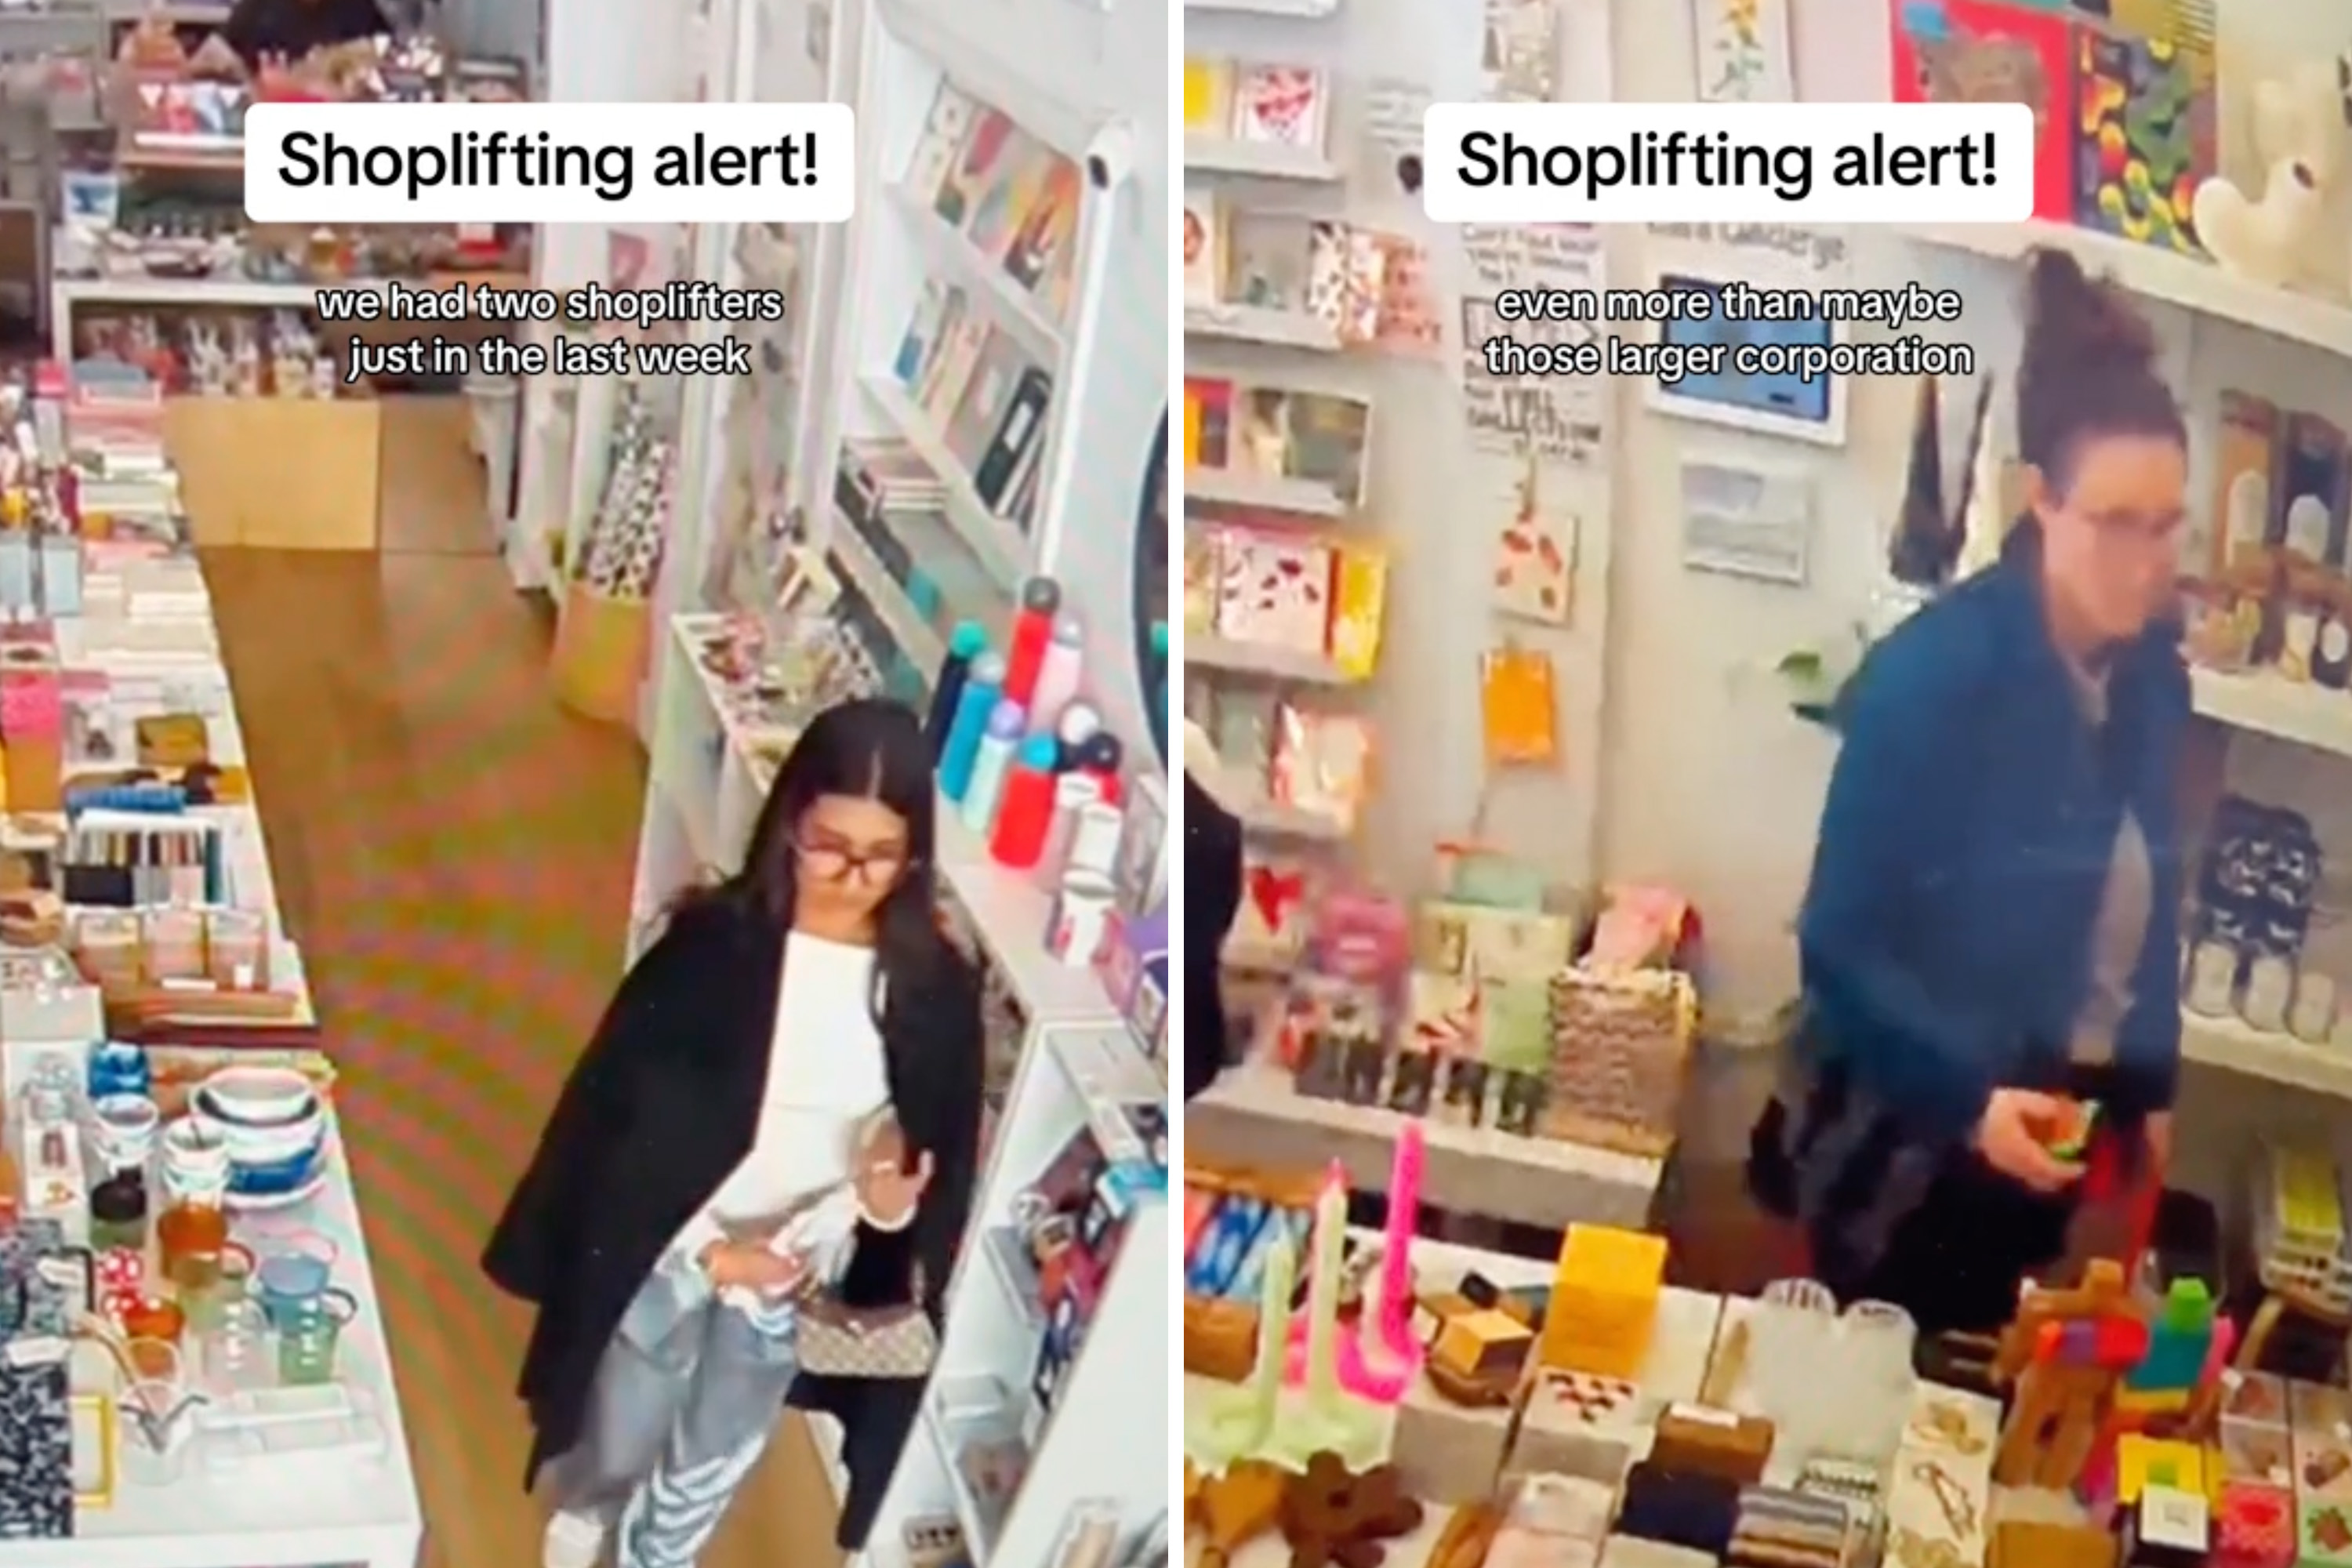 Two separate security camera screenshots show individuals in a store with "Shoplifting alert!" text overlays.